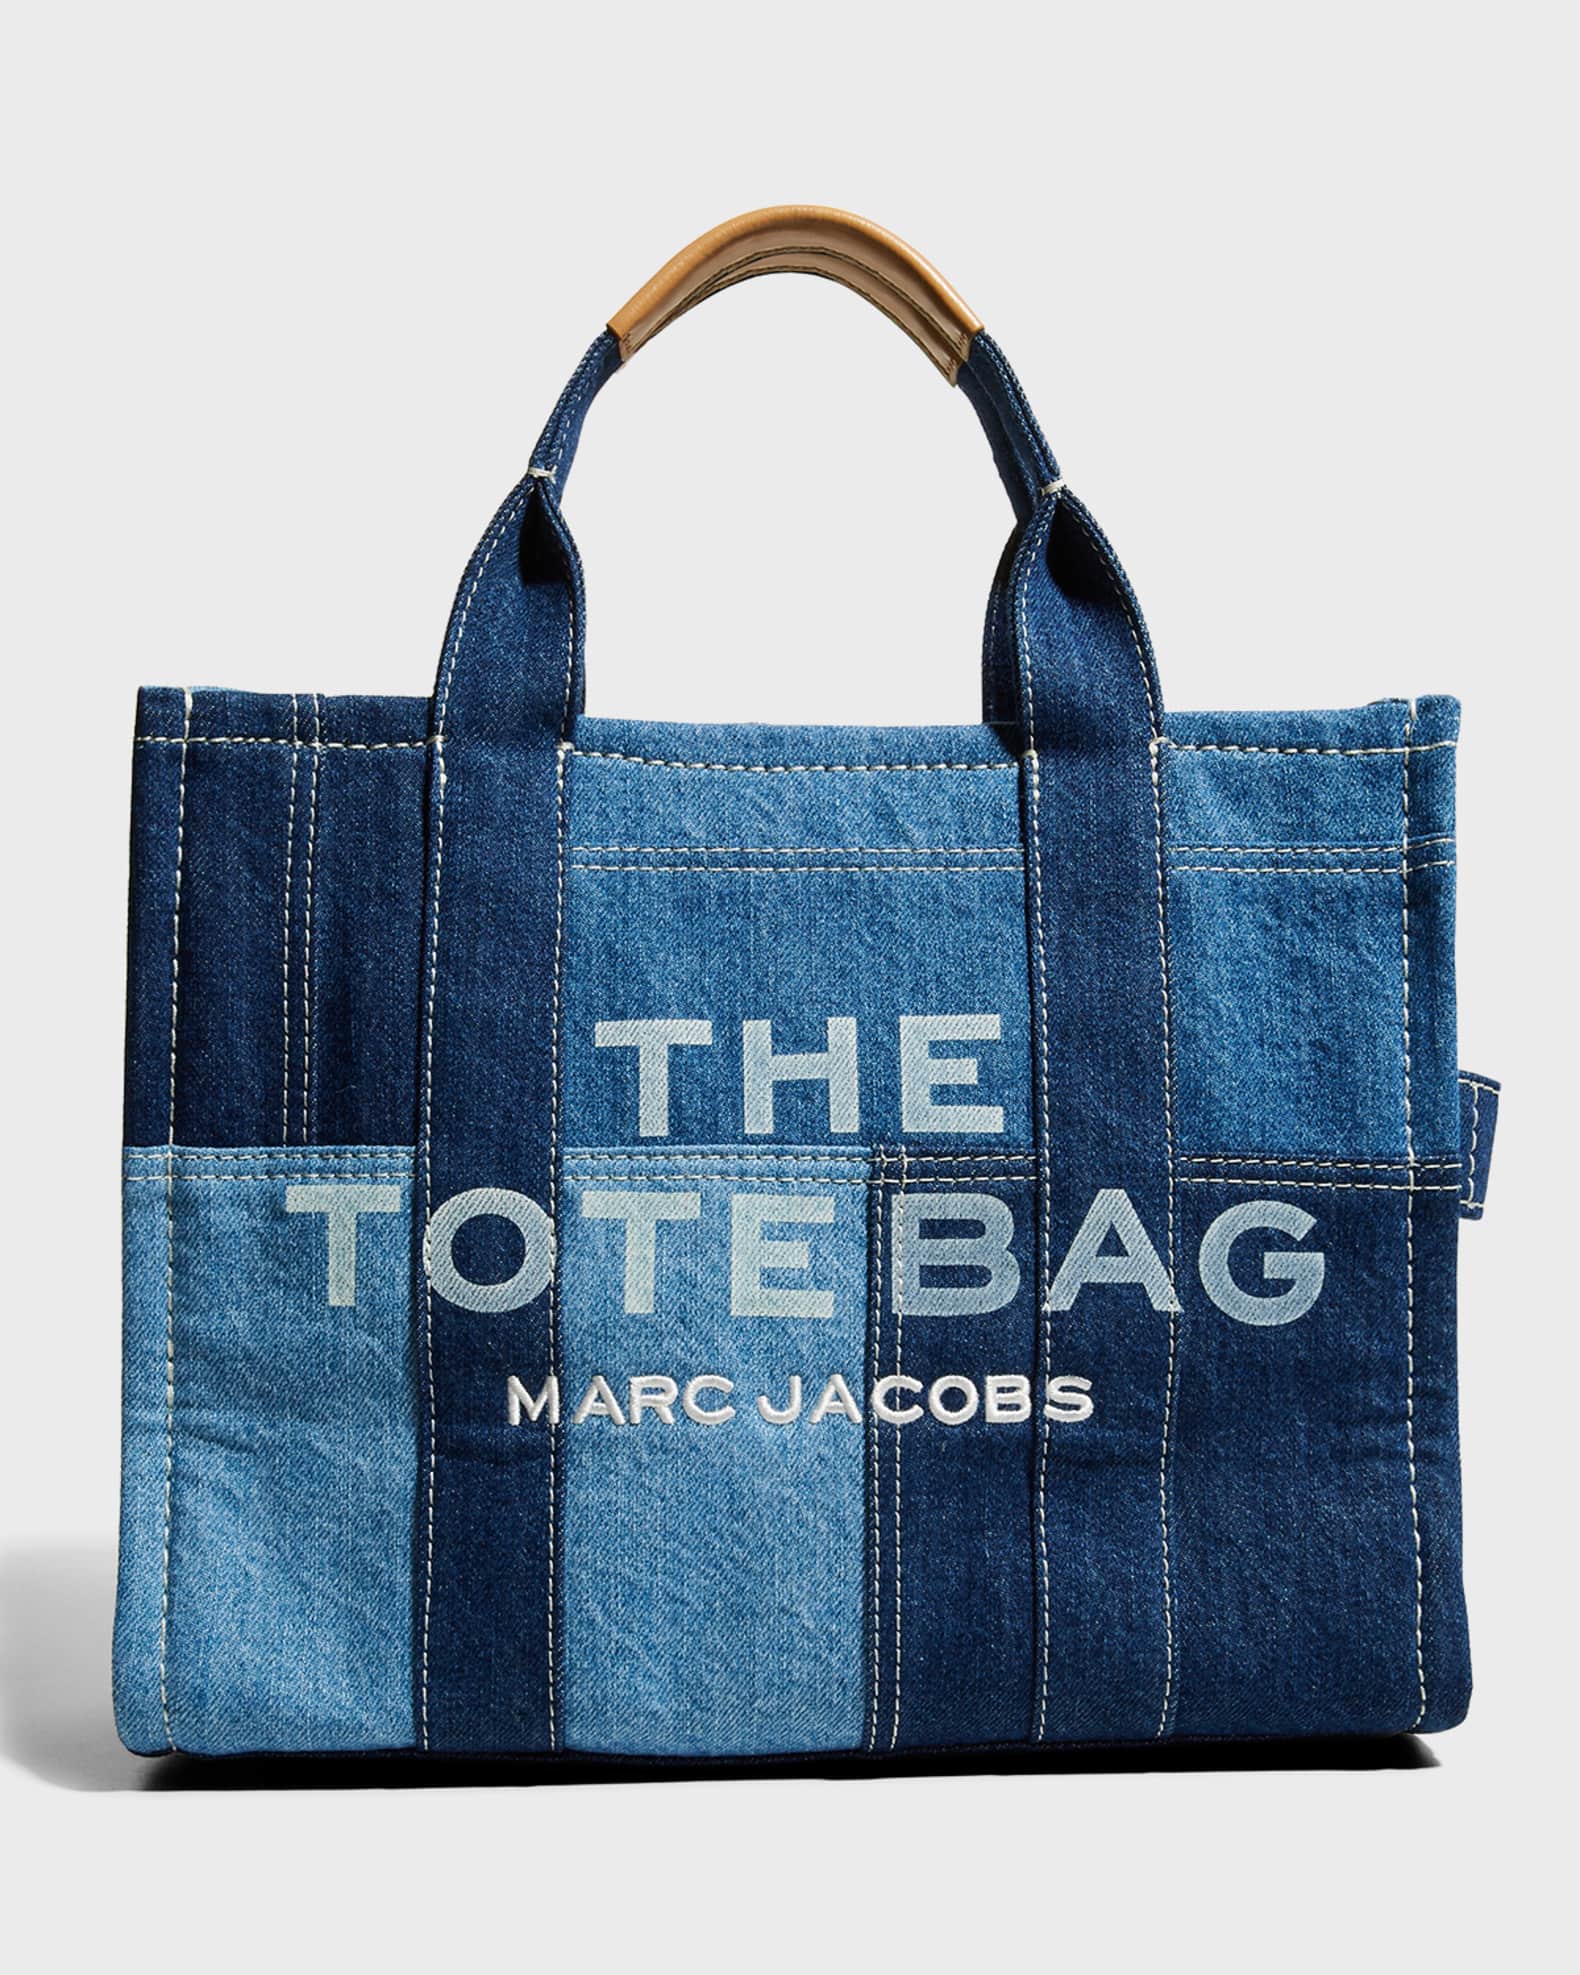 Marc Jacobs - Introducing THE DENIM TOTE, inspired by our